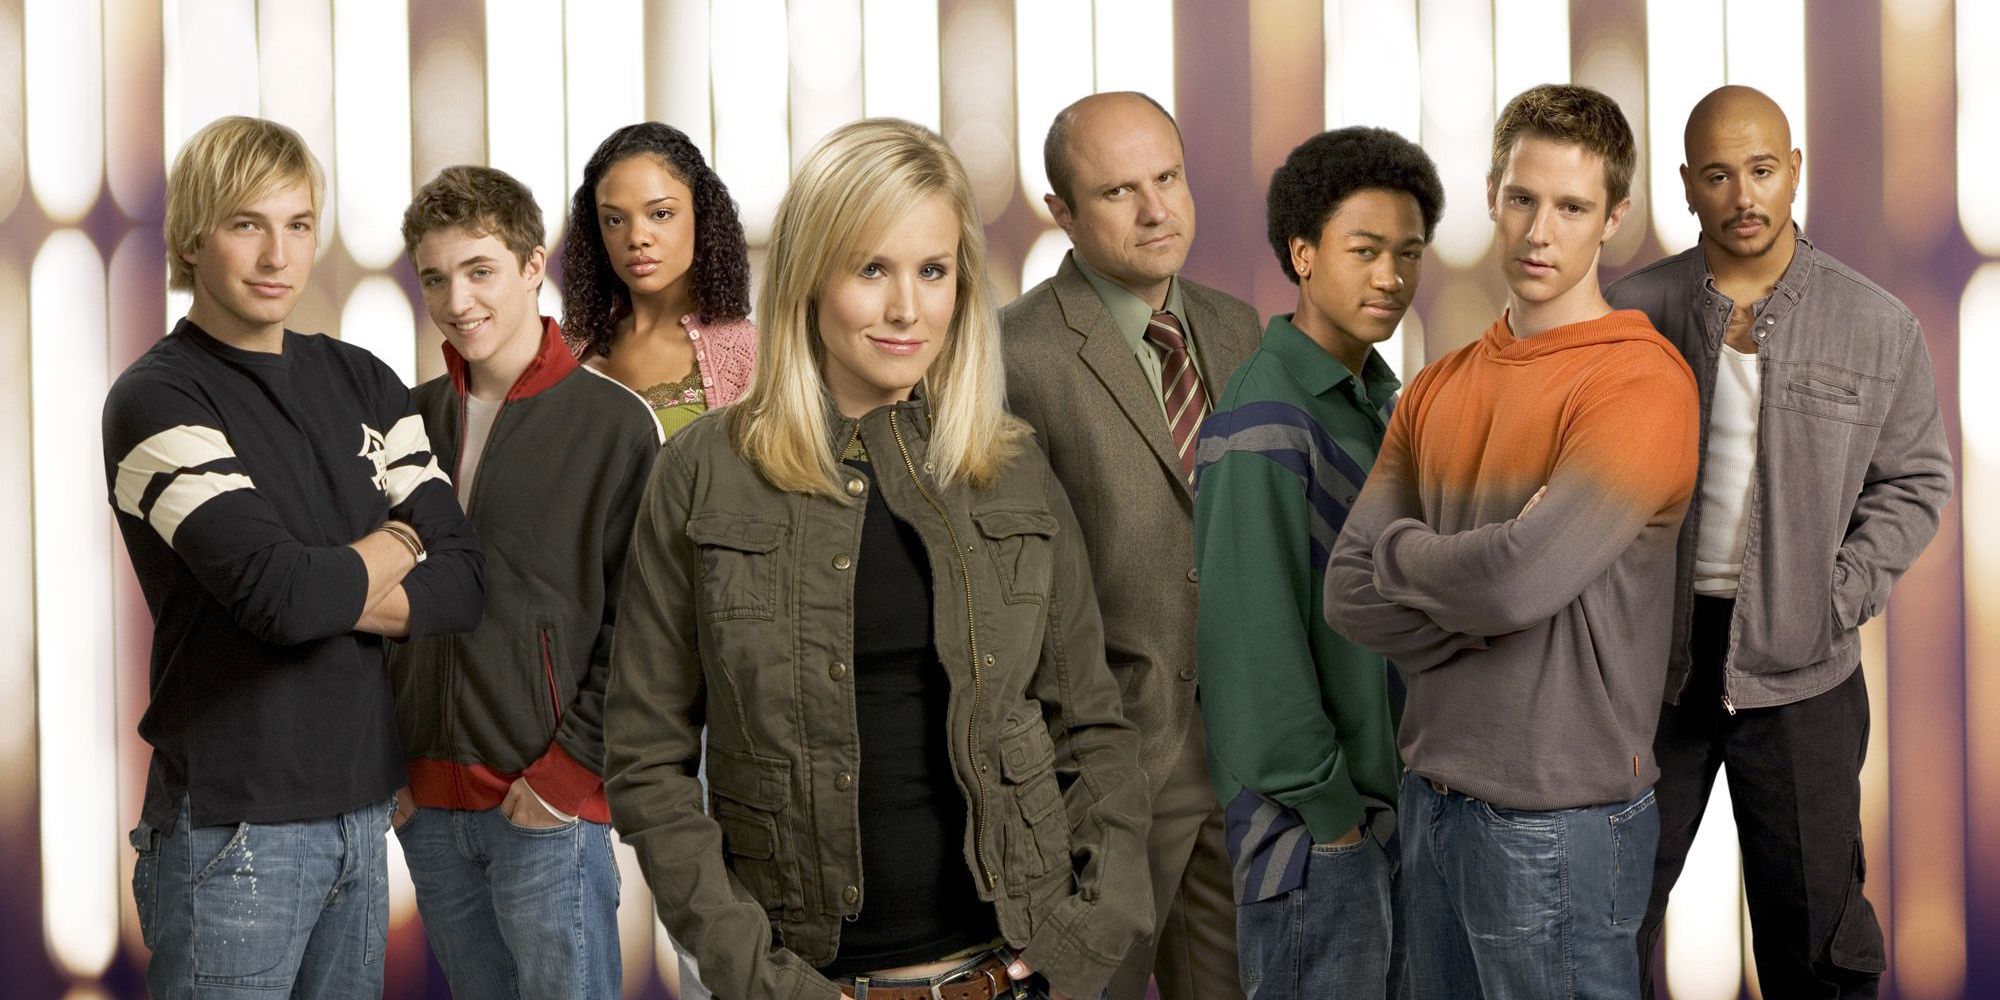 Veronica Mars: Every Season Ranked, According to Rotten Tomatoes